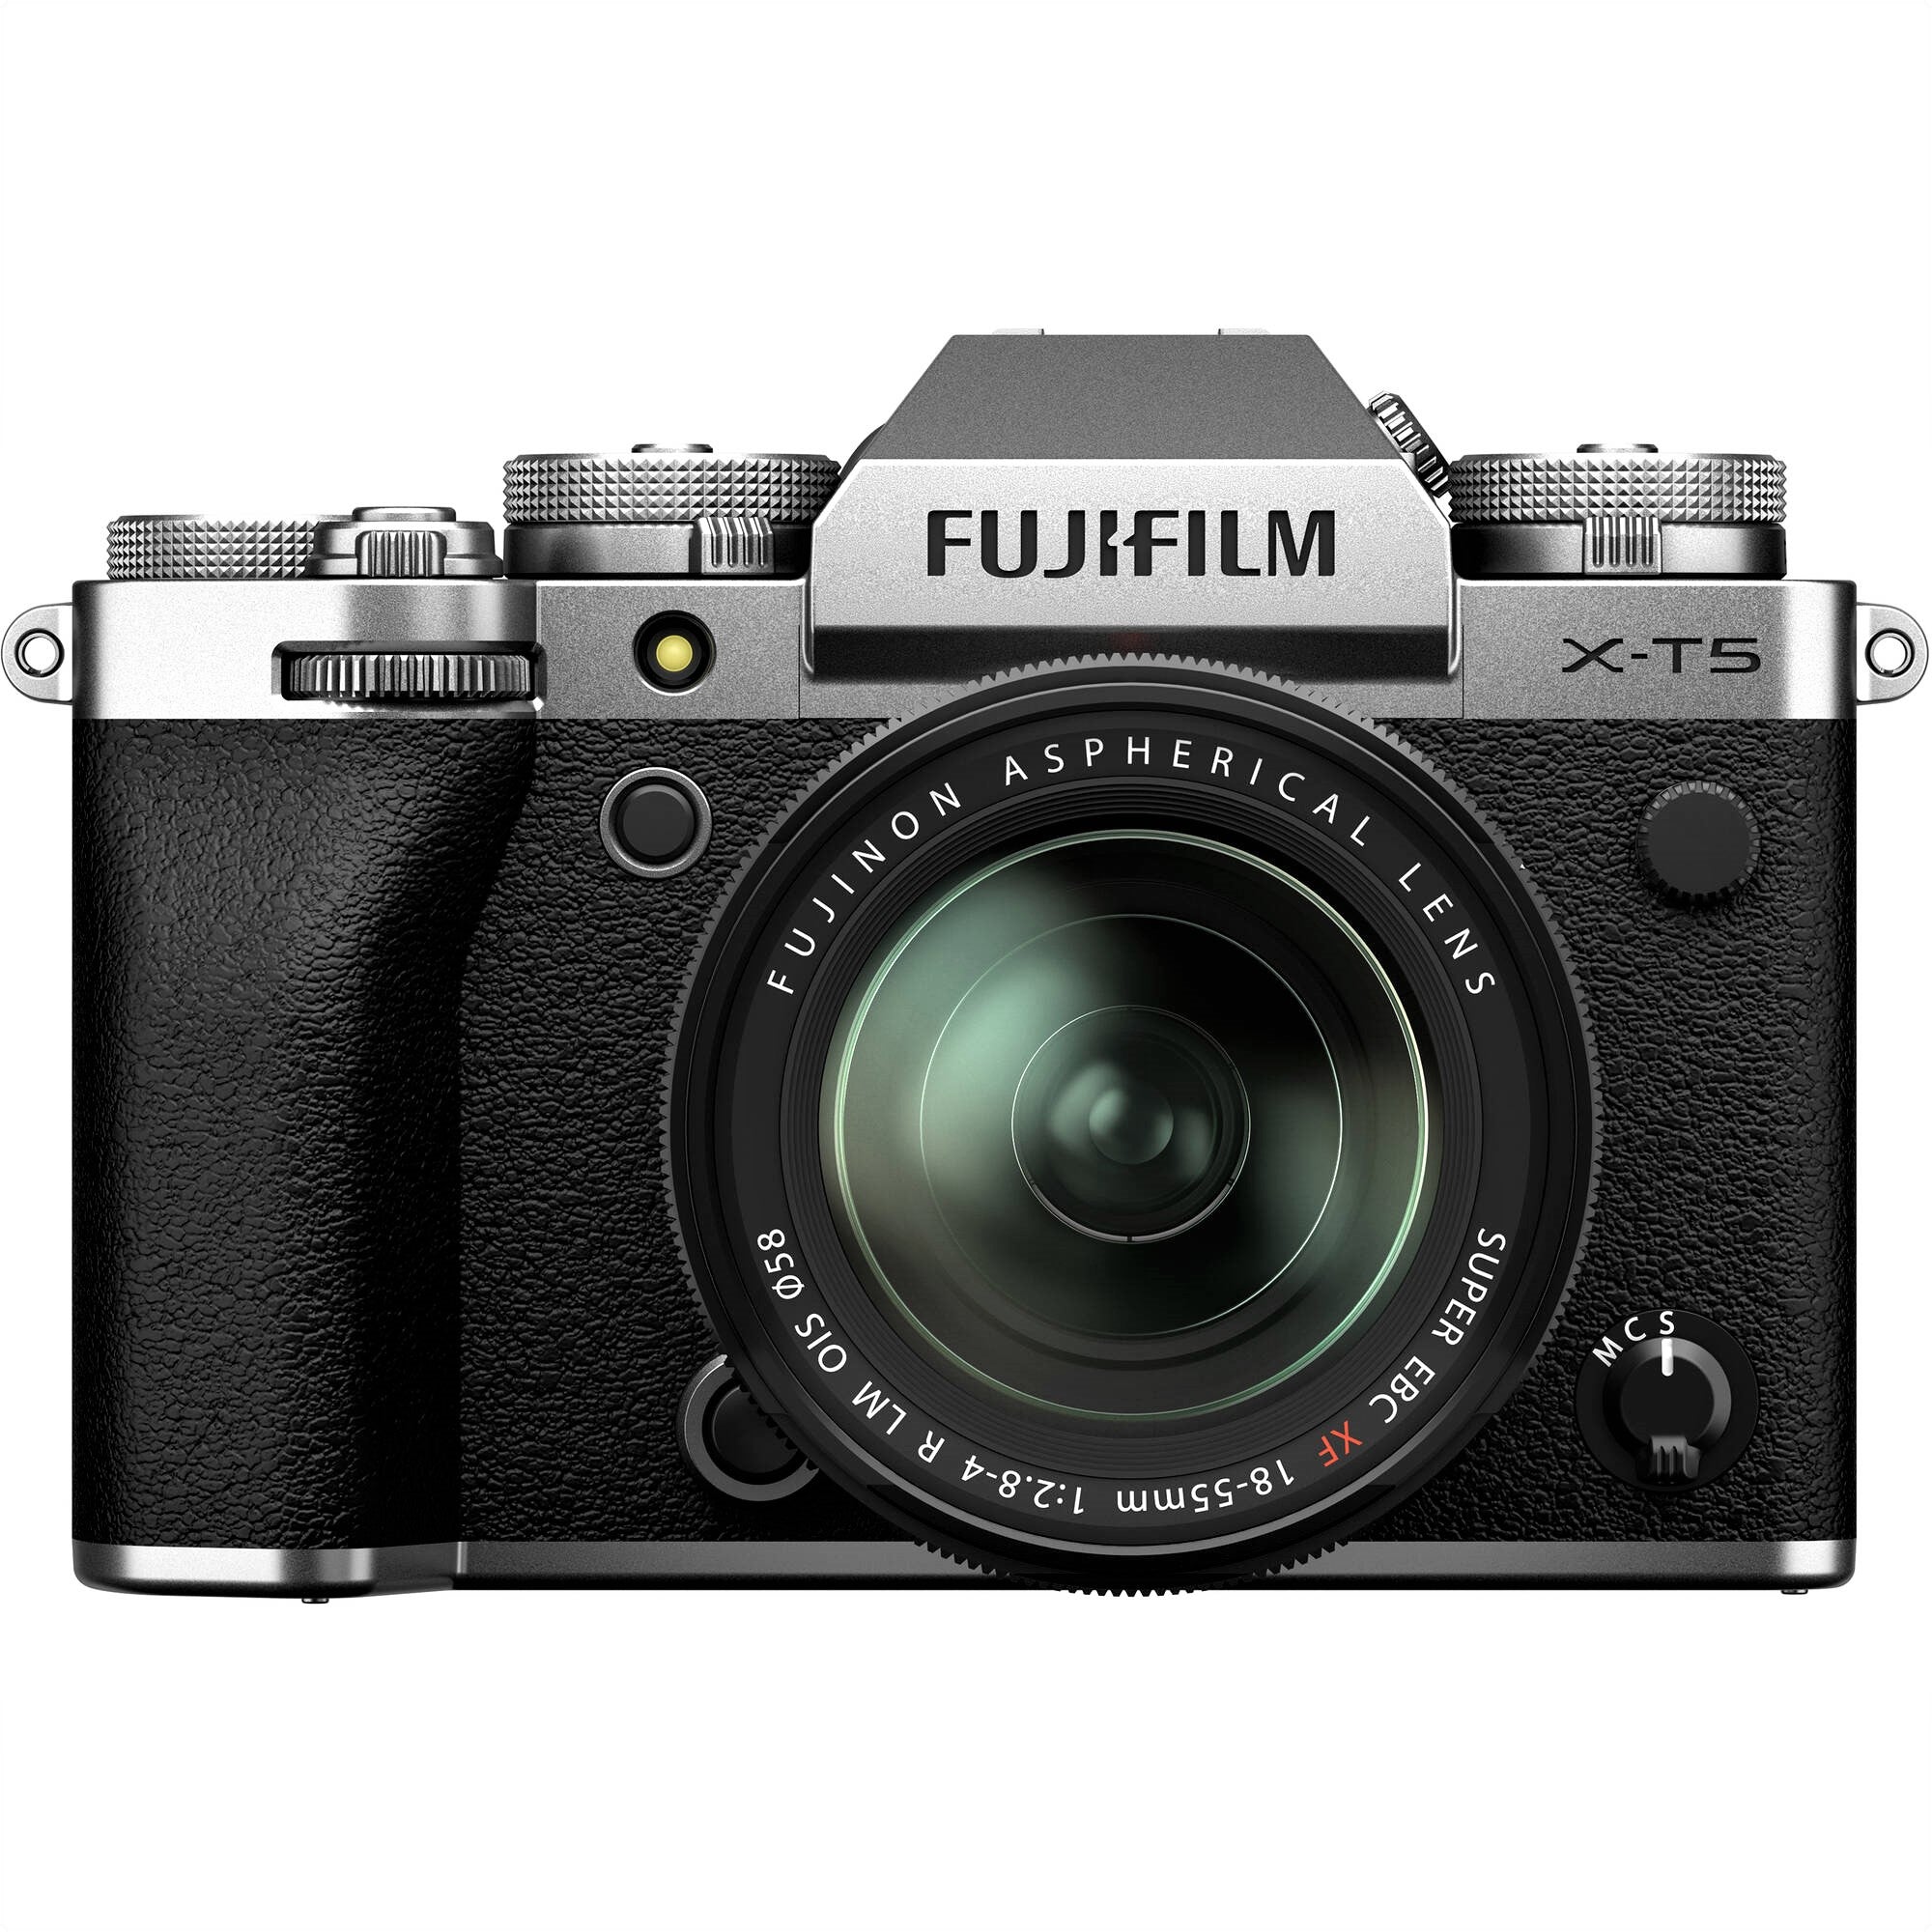 Fujifilm X-T5 Mirrorless Camera with 18-55mm Lens (Silver) - Front view